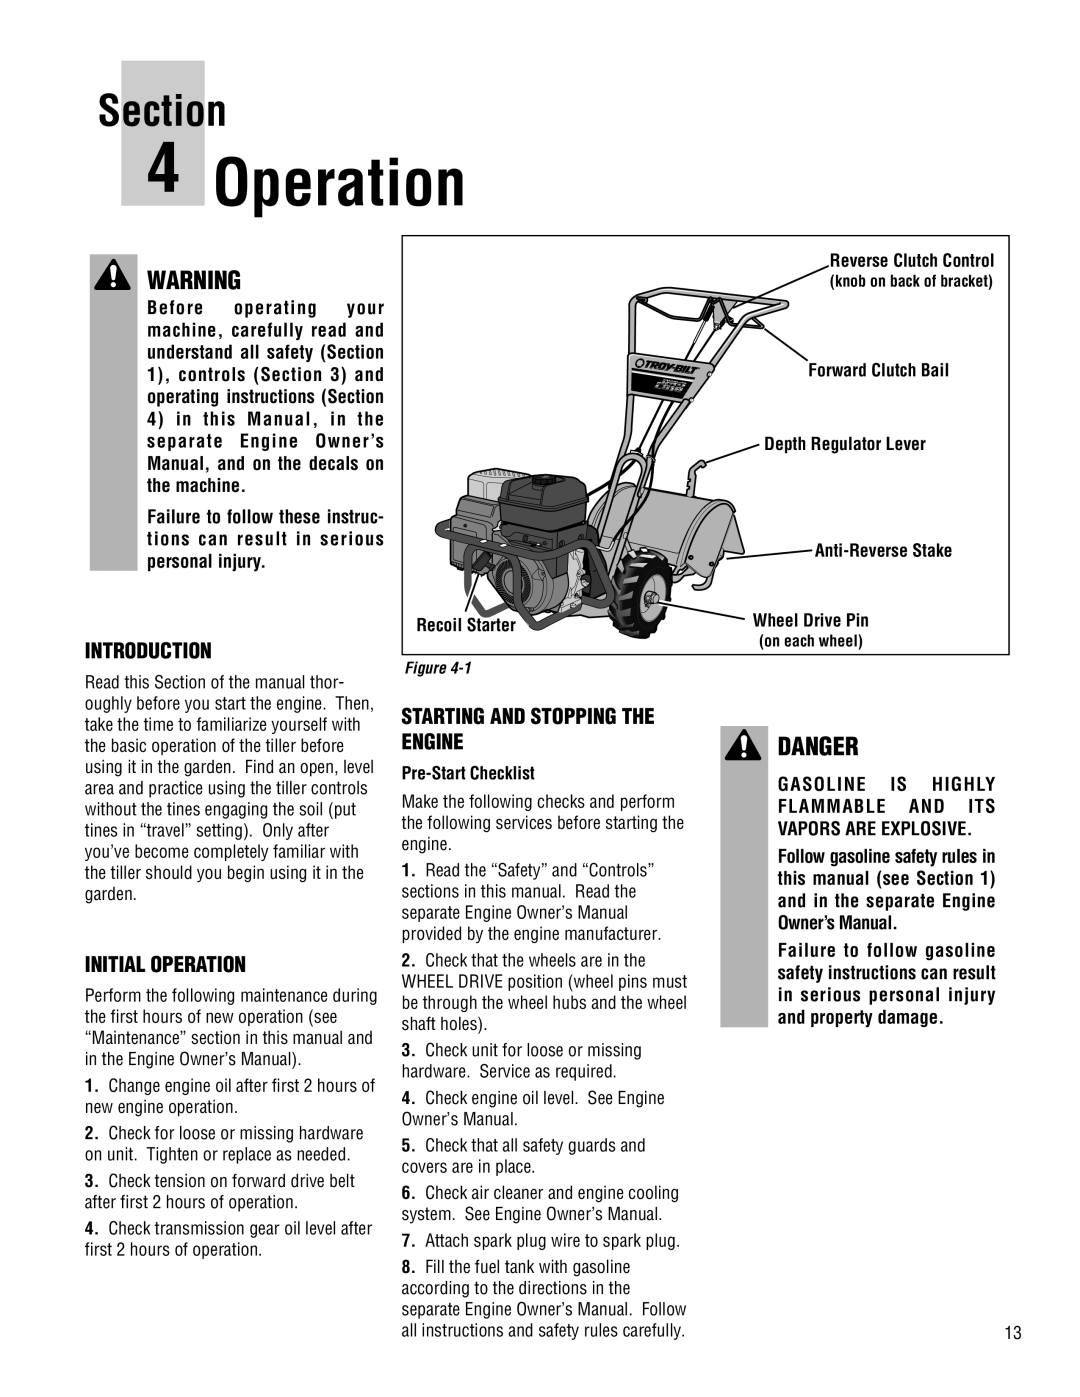 Troy-Bilt 645A-Bronco Danger, Introduction, Initial Operation, Starting And Stopping The Engine, Forward Clutch Bail 